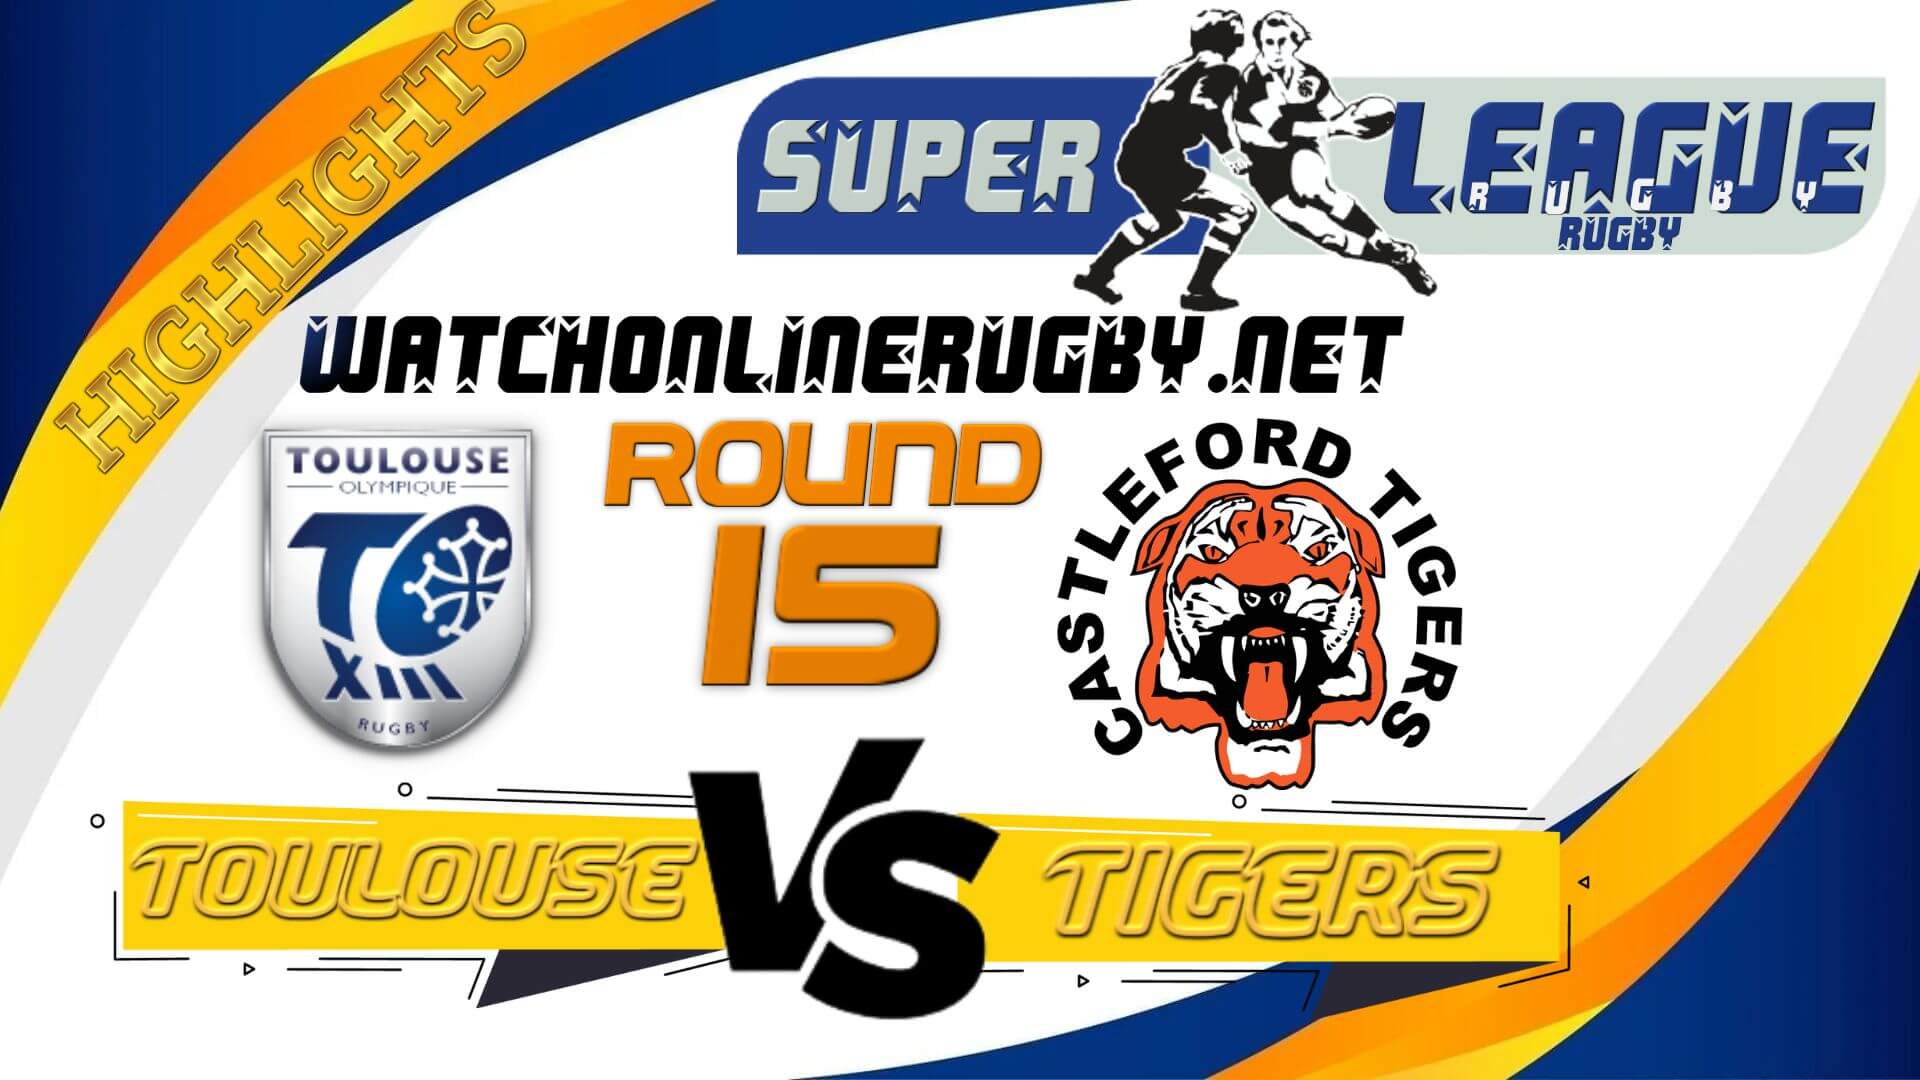 Toulouse Vs Castleford Tigers Super League Rugby 2022 RD 15